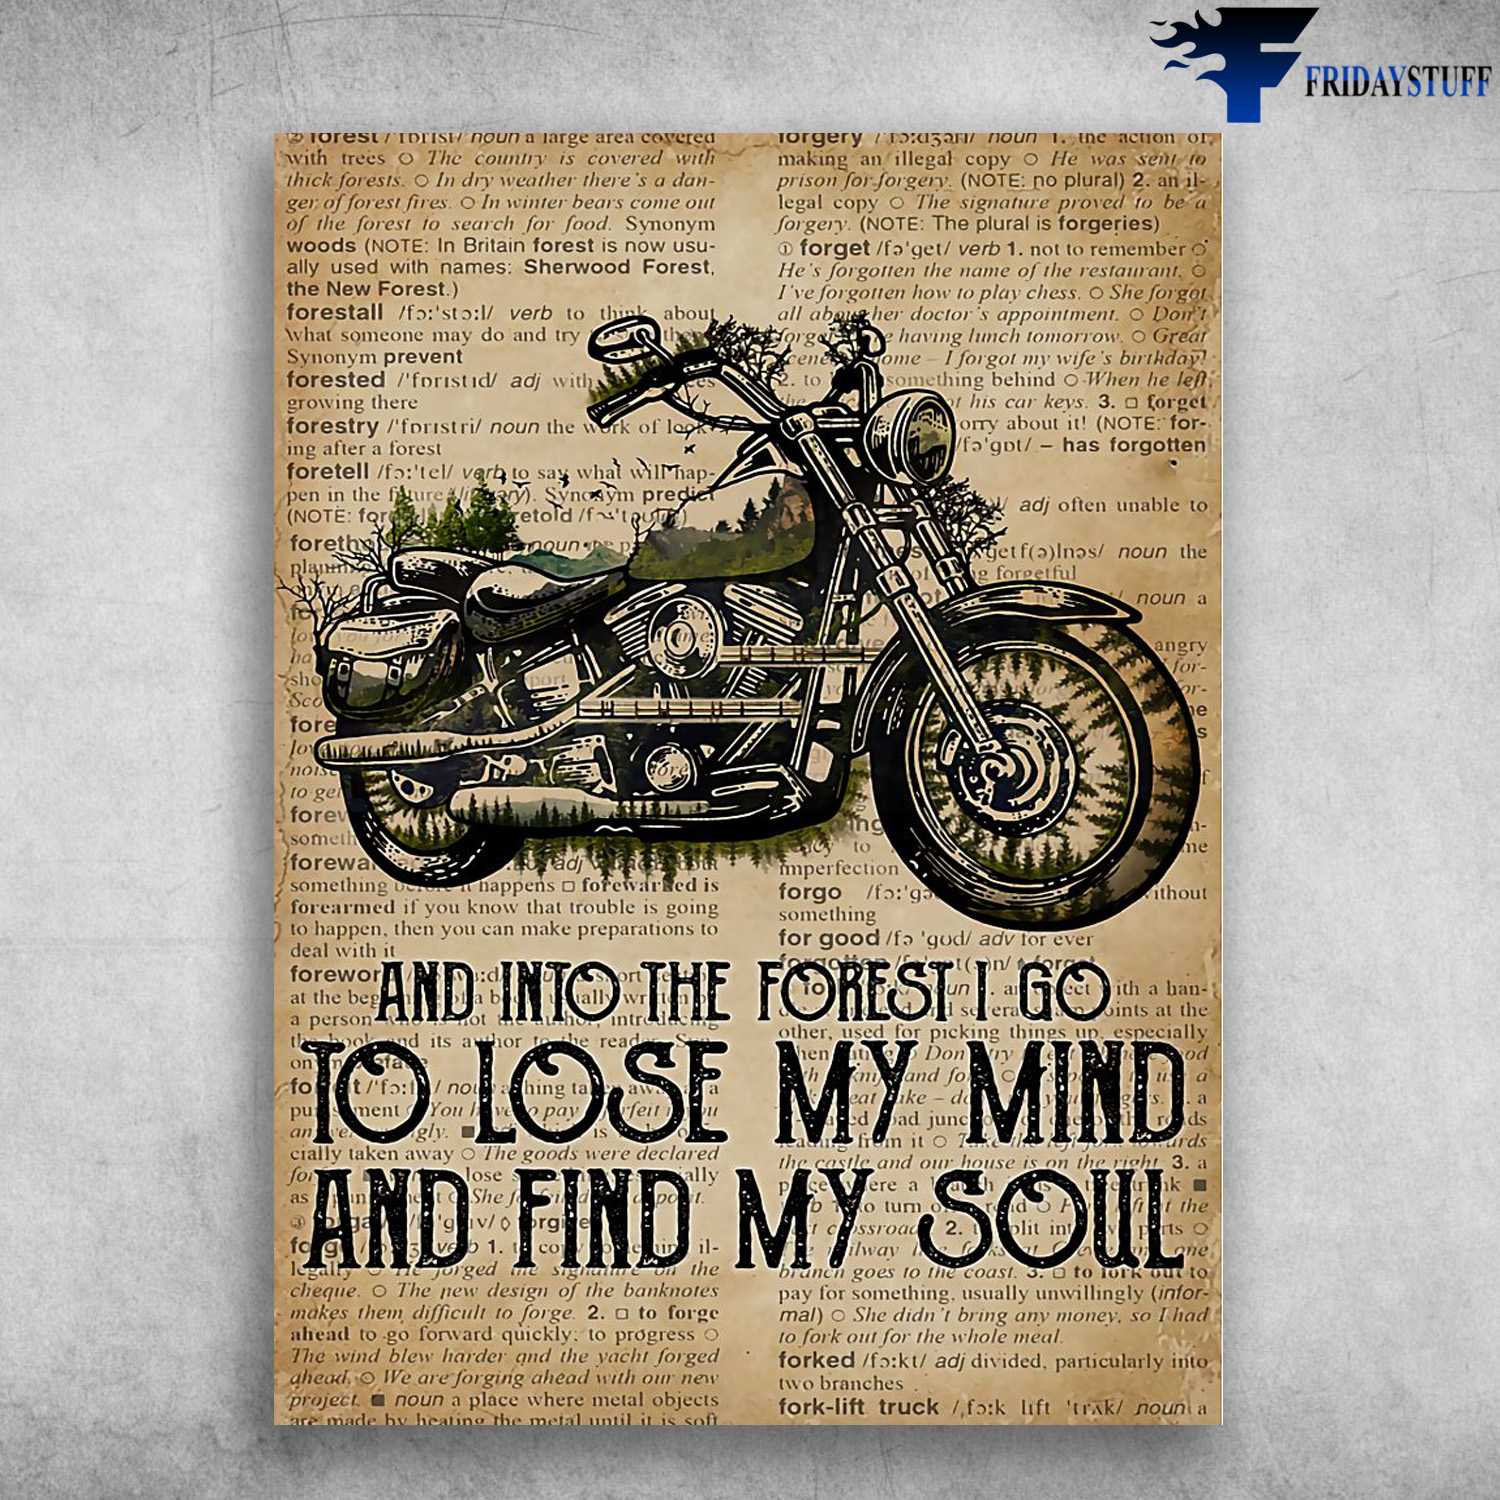 Motocycle Lover, Biker Poster, Motobike Decor, And Into The Forest, I Go To Lose My Mind, And Find My Soul